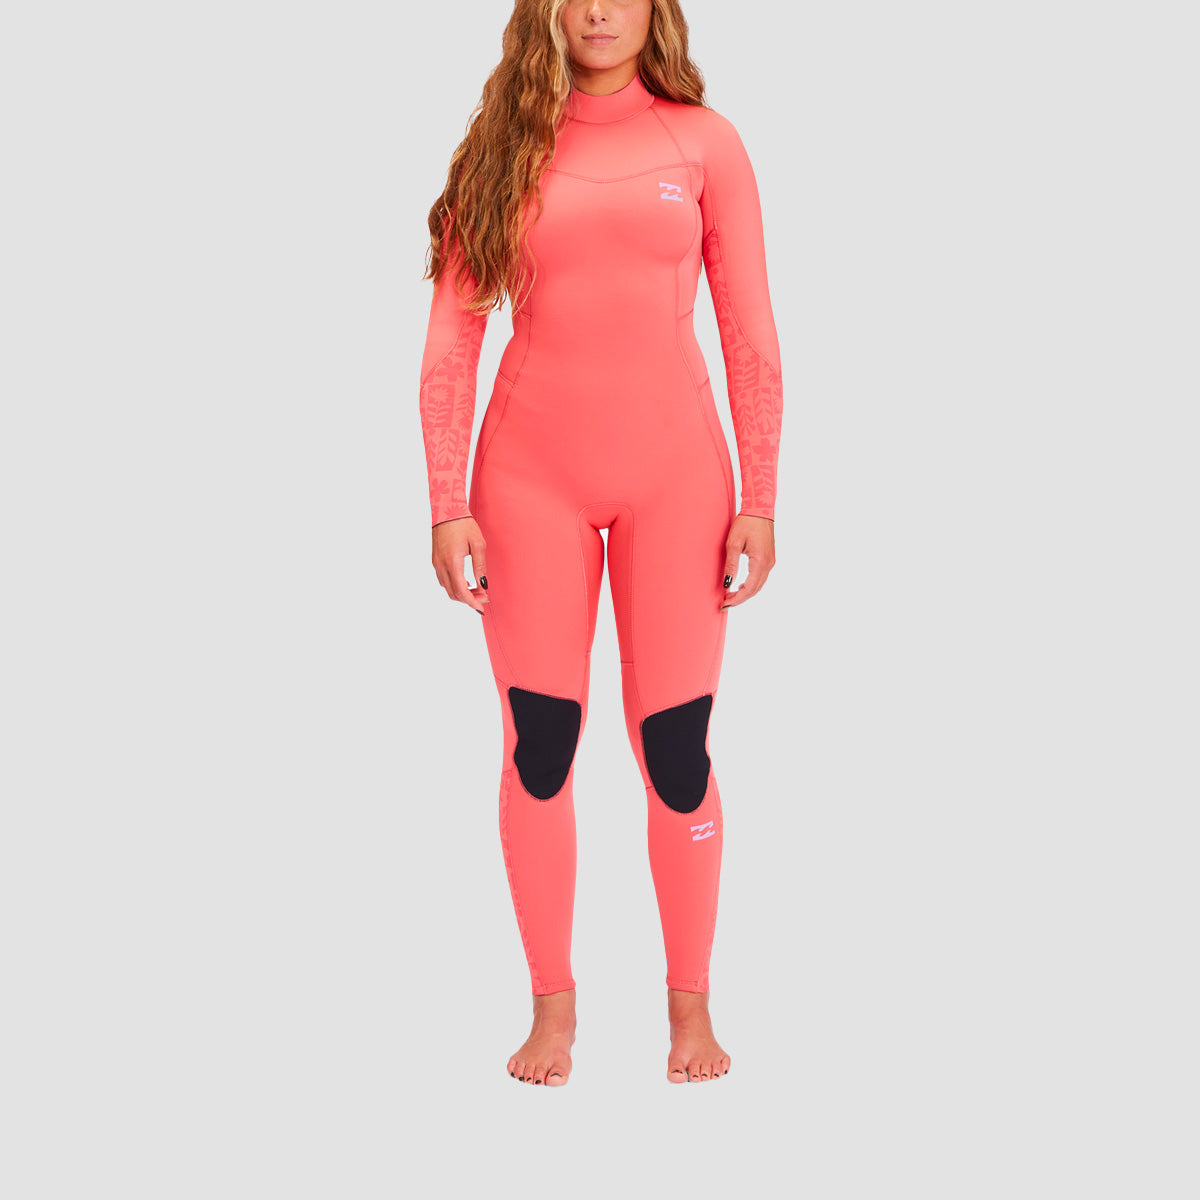 Billabong 4/3mm Synergy Back Zip Wetsuit Vintage Coral - Womens